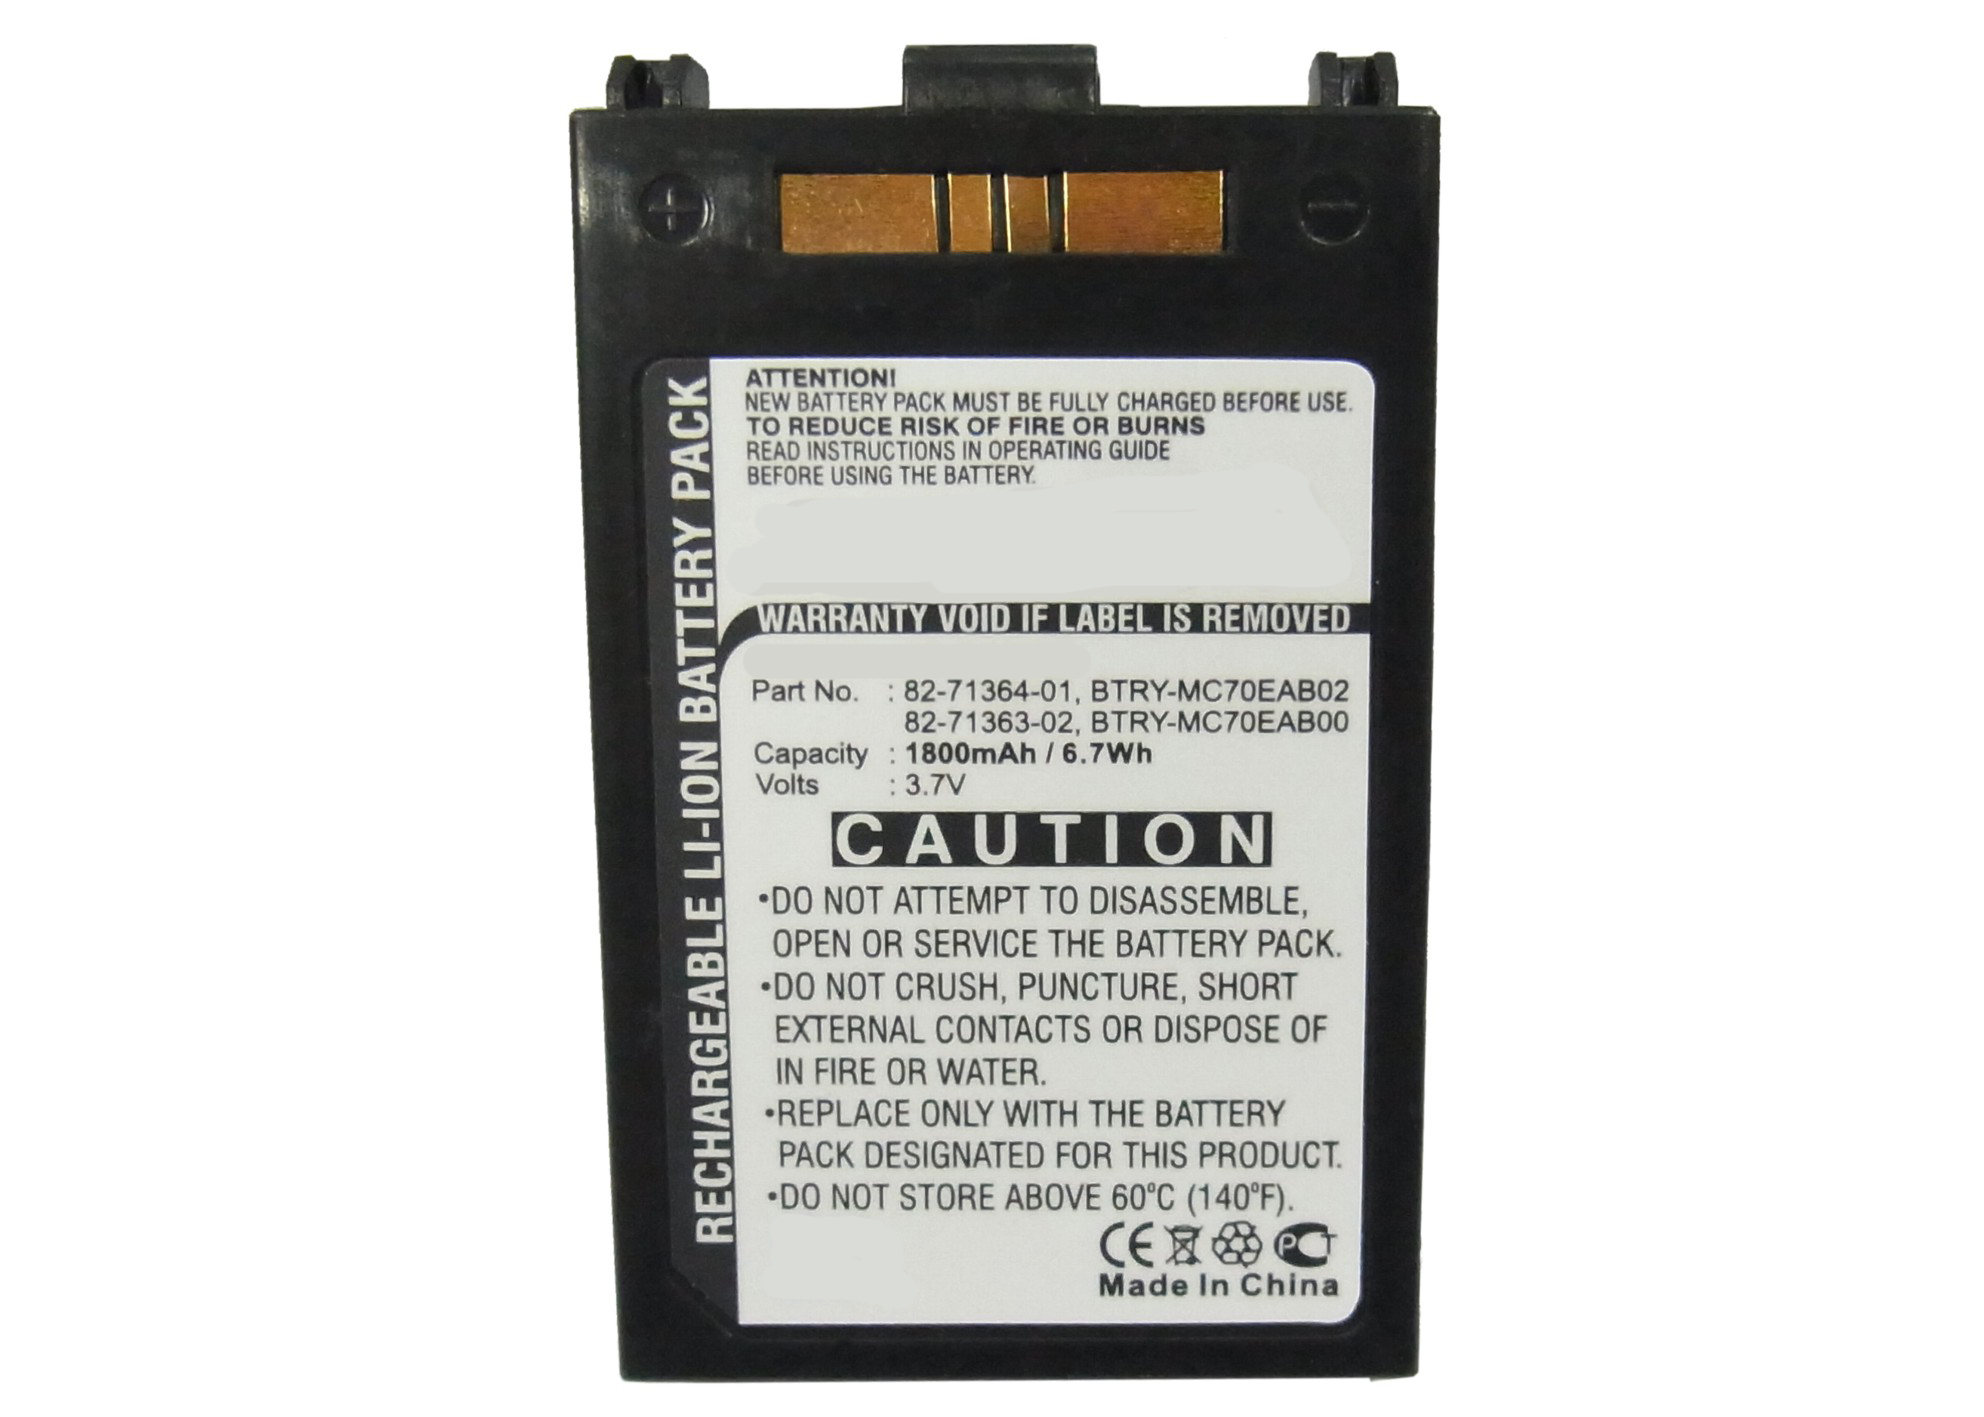 Synergy Digital Barcode Scanner Battery, Compatiable with Symbol 82-71363-02, 82-71364-01, 82-71364-03, 82-71364-06, BTRY-MC70EAB00, BTRY-MC70EAB02, BTRY-MC7XEAB00, BTRY-MC7XEAB0H Barcode Scanner Battery (3.7V, Li-ion, 1800mAh)